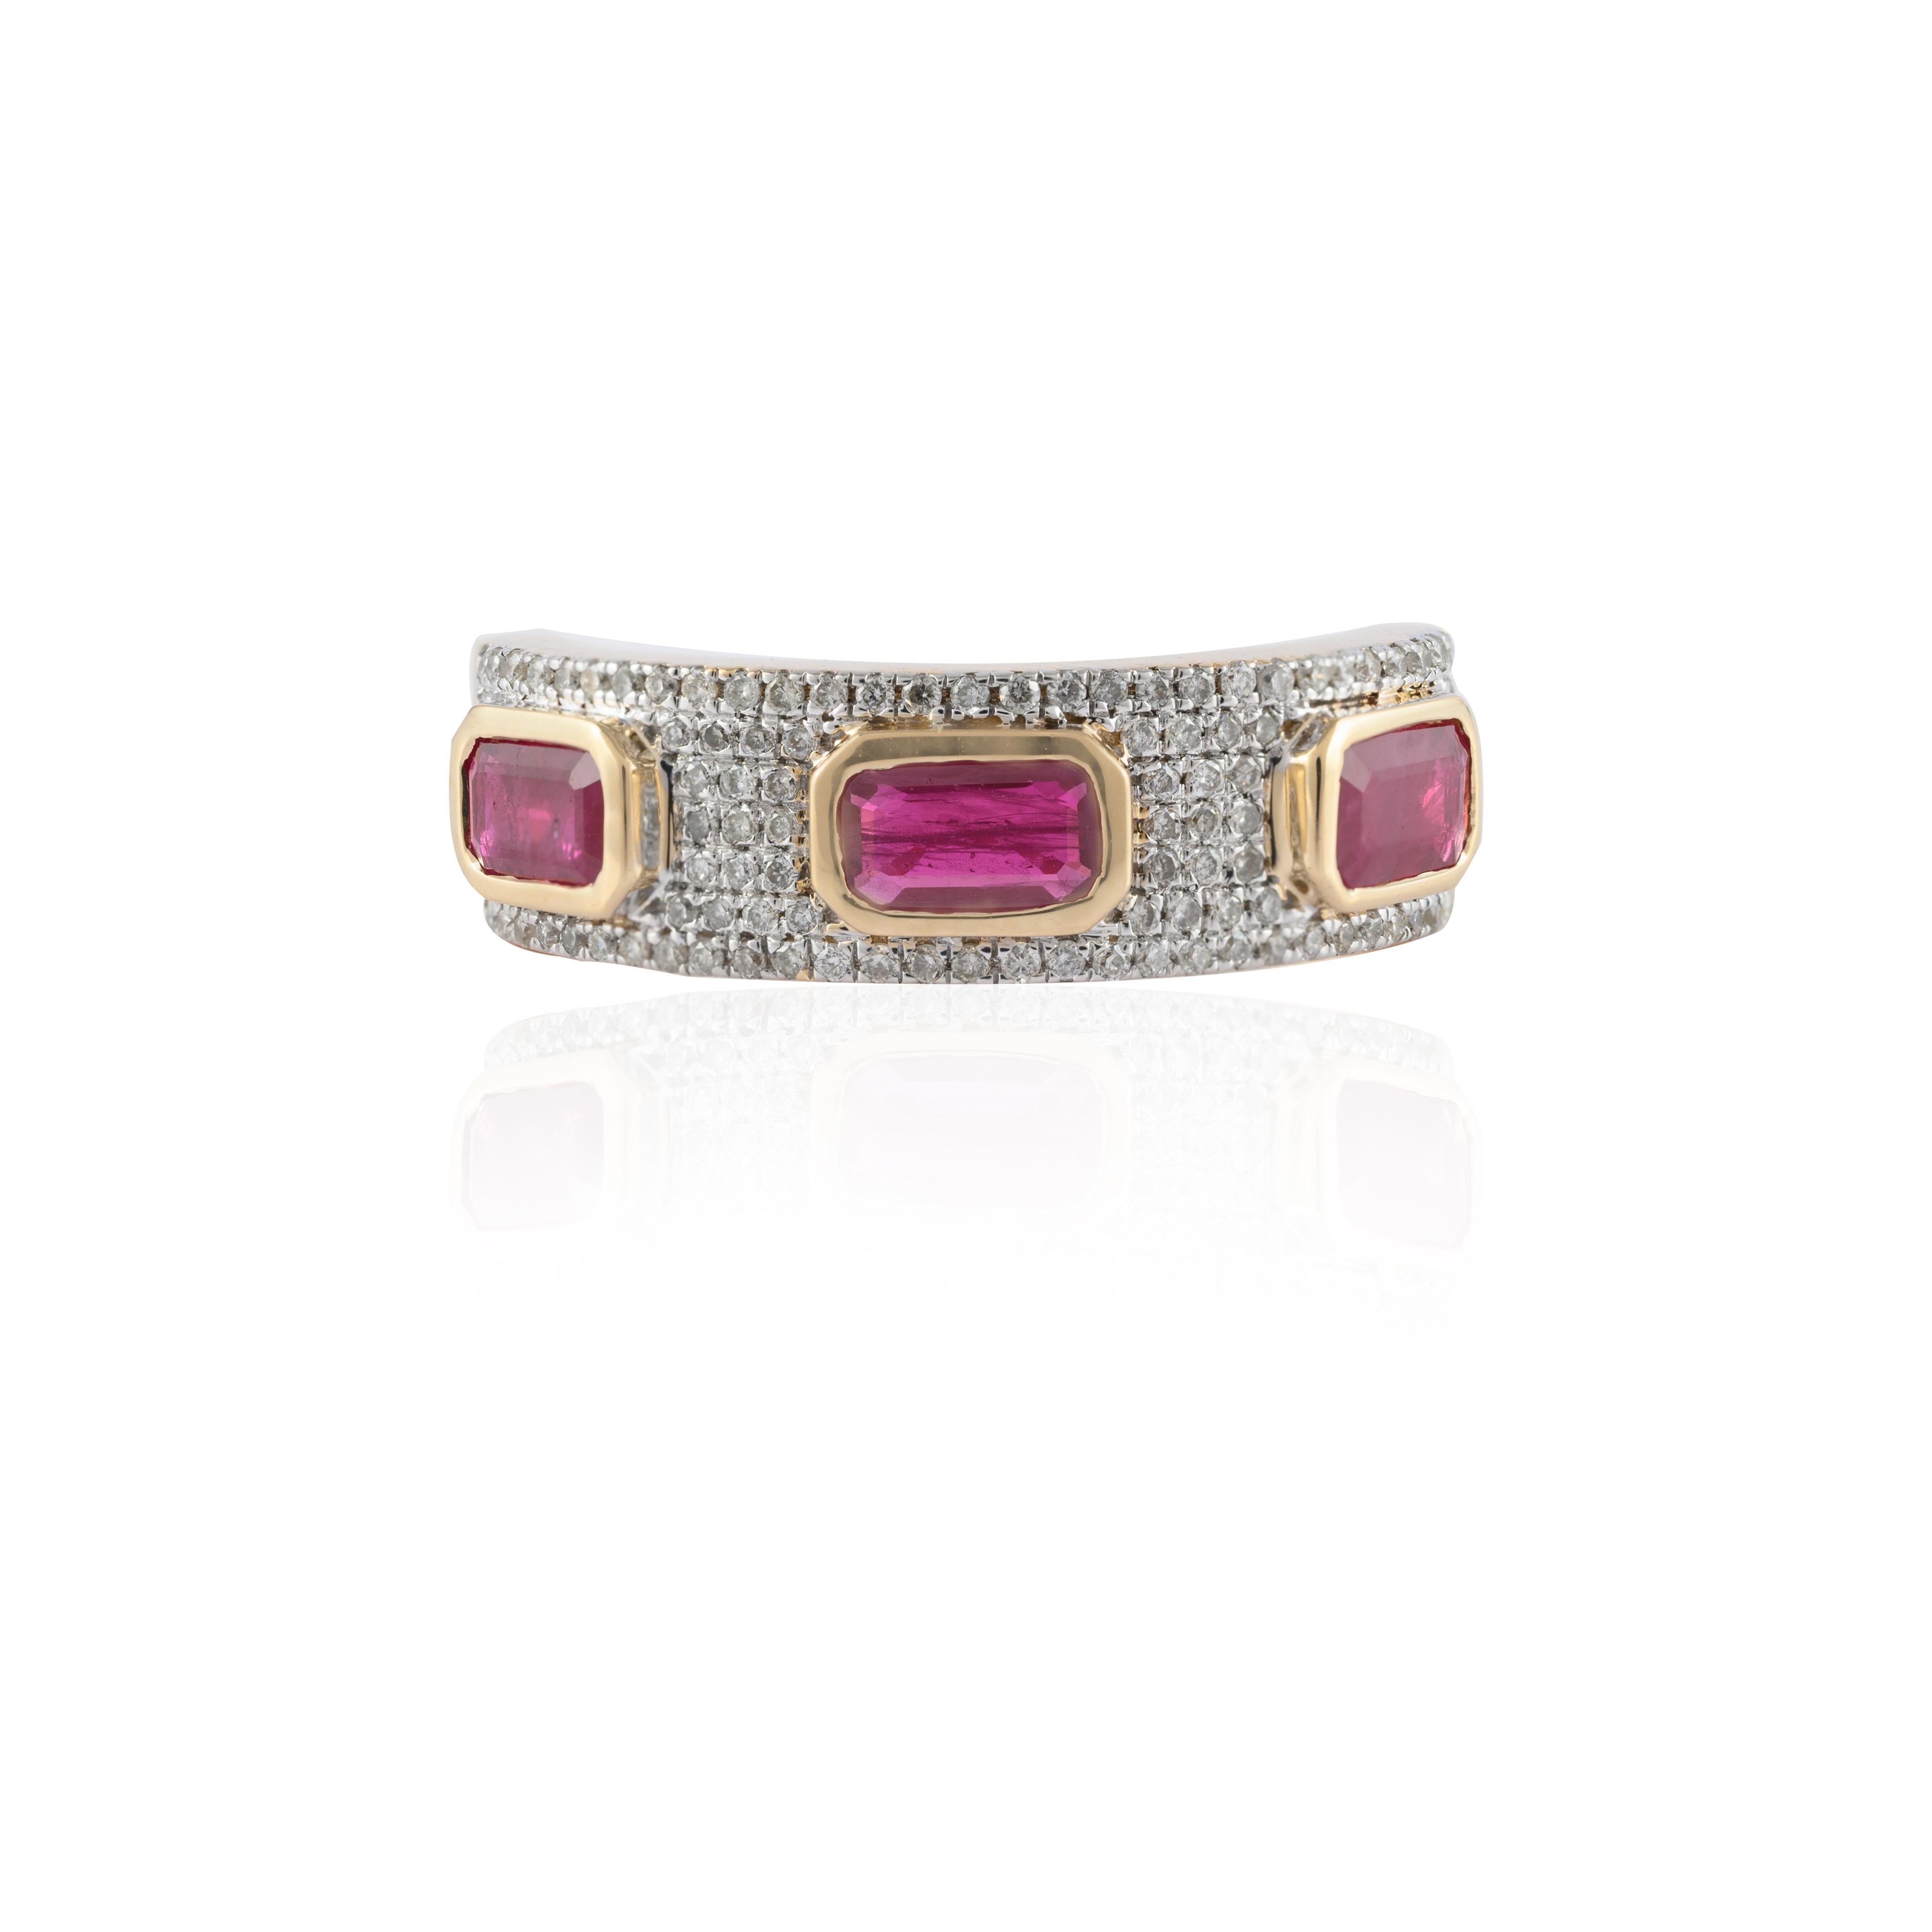 For Sale:  Statement Diamond and Ruby Wedding Ring Studded in 14k Solid Yellow Gold 2